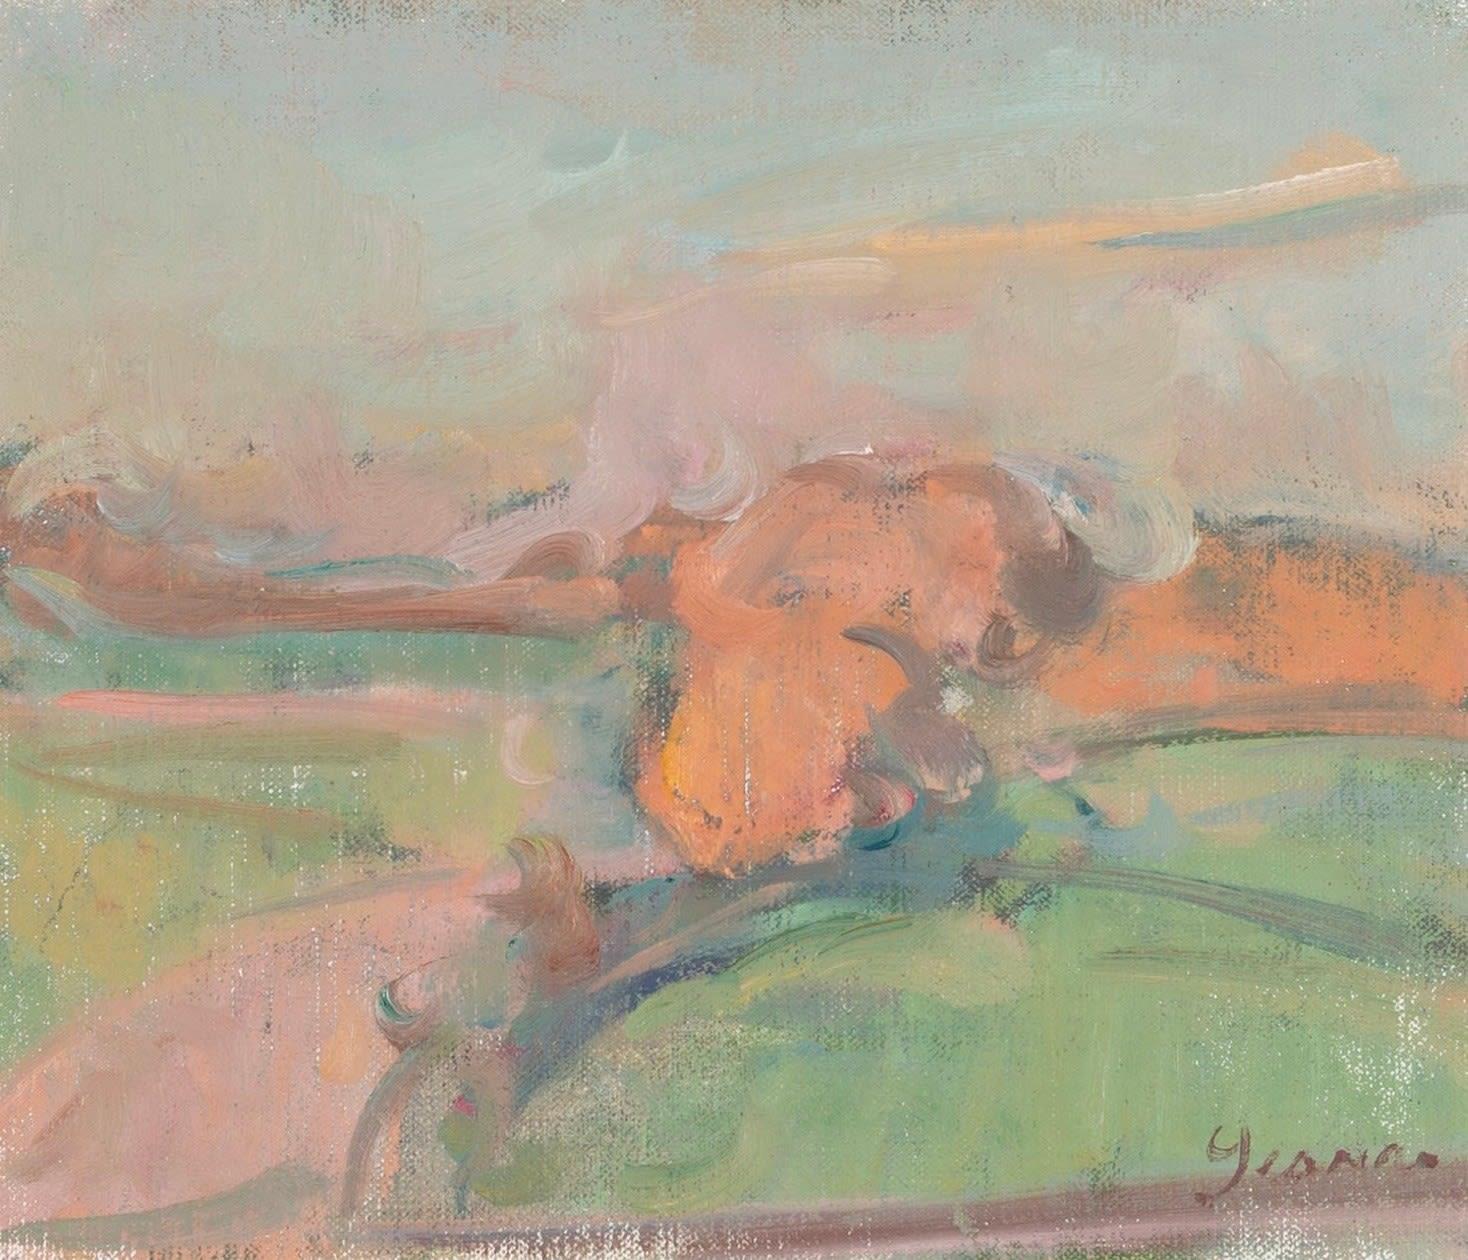 Autumn Trees, Salisbury Plain Painting by Martin Yeoman B. 1953

Additional information:
Medium: Oil on panel
Dimensions: 22 x 26 cm
8 5/8 x 10 1/4 in

Martin Yeoman was born in 1953, and studied with Peter Greenham at the Royal Academy Schools,